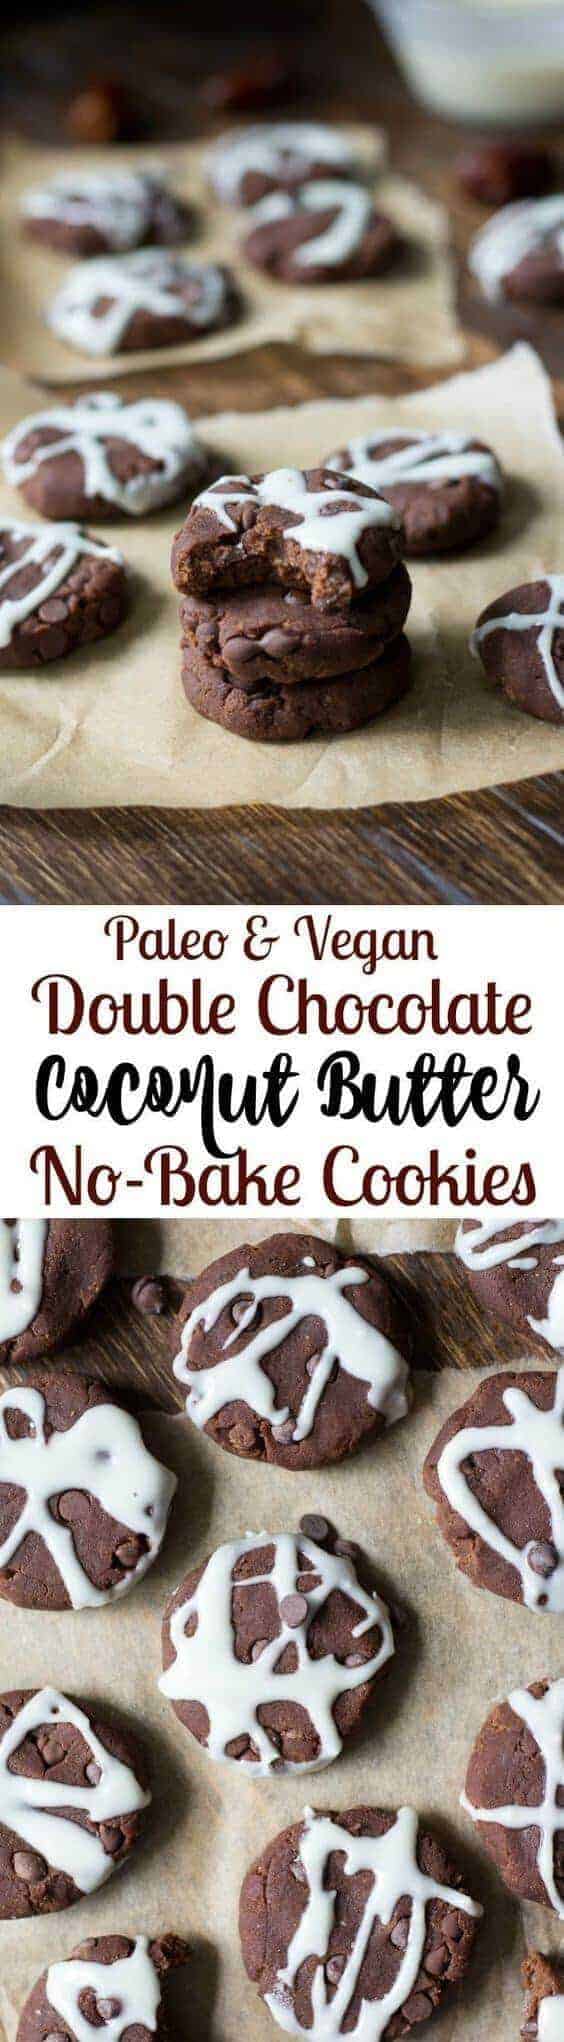 Chocolate Coconut Butter No-Bake Paleo Cookies